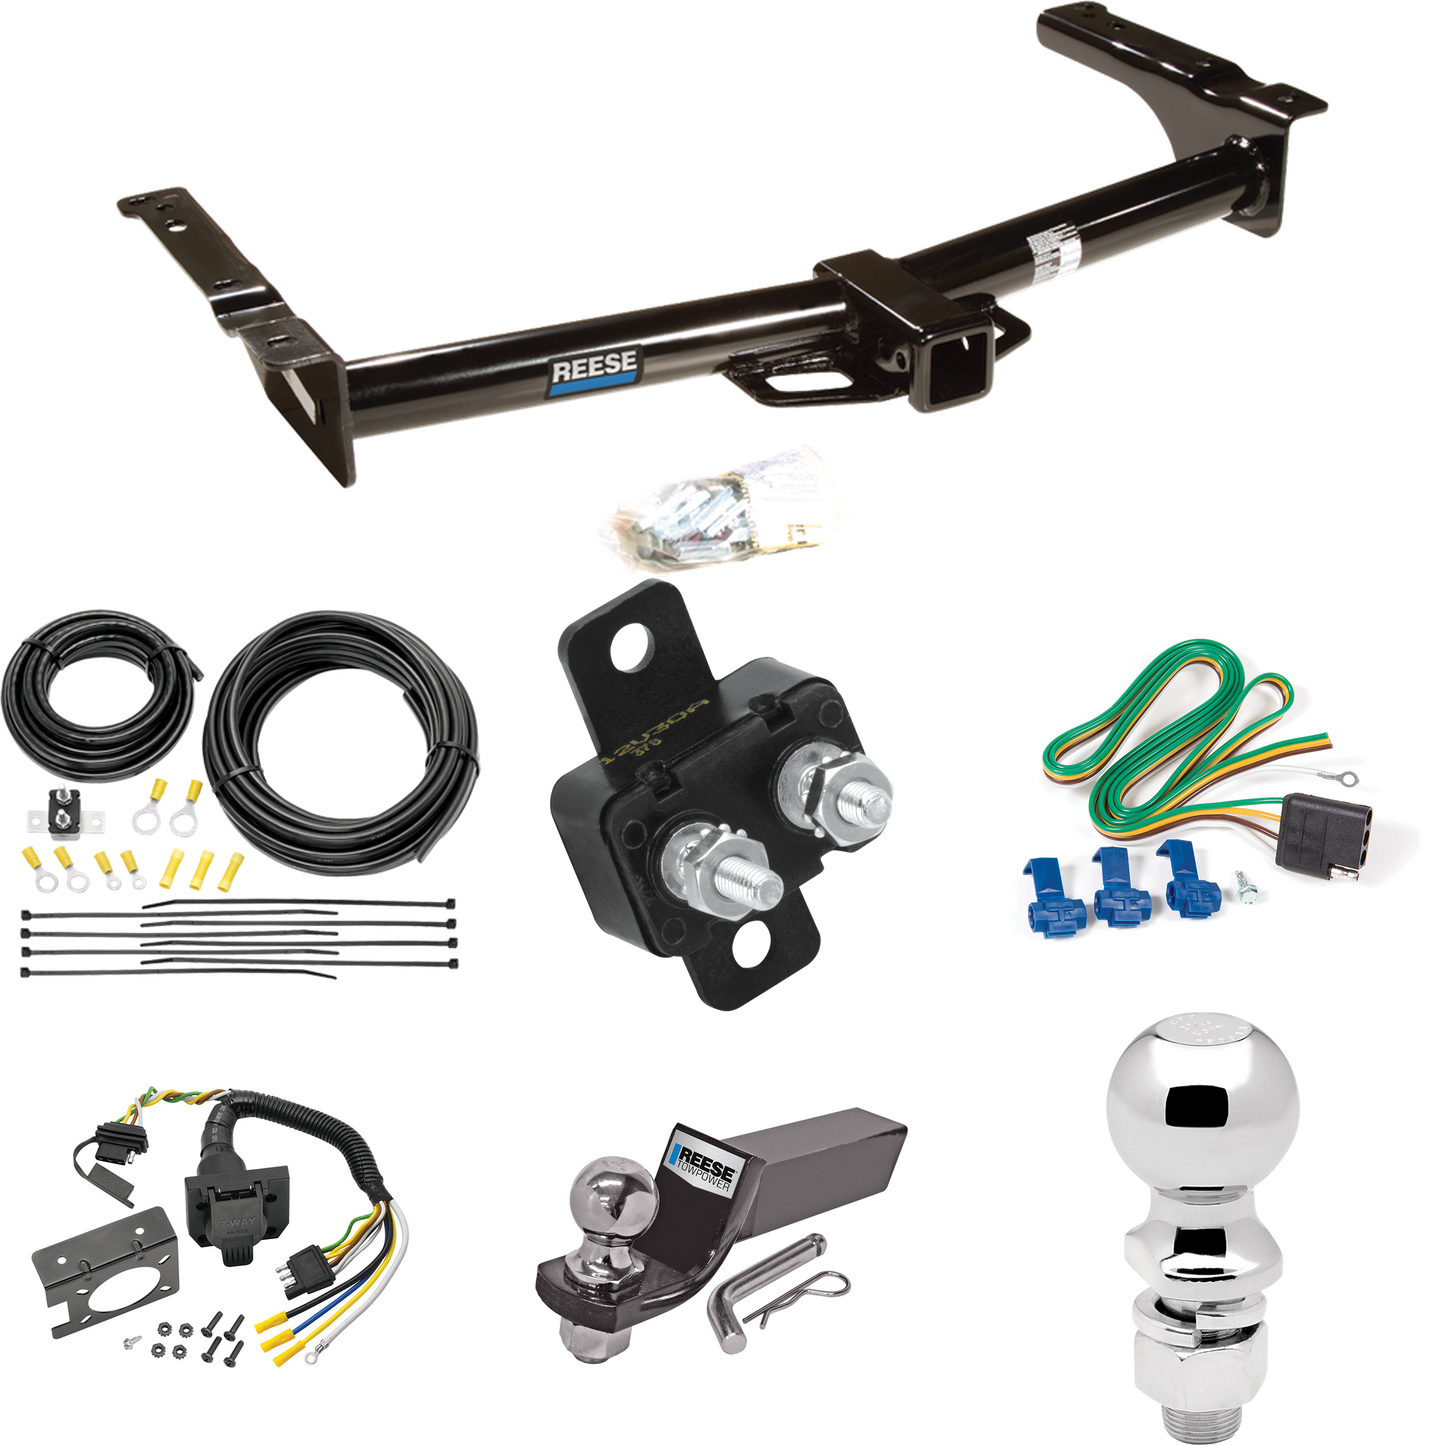 Fits 1975-1983 Ford E-100 Econoline Trailer Hitch Tow PKG w/ 7-Way RV Wiring + 2" & 2-5/16" Ball + Drop Mount By Reese Towpower